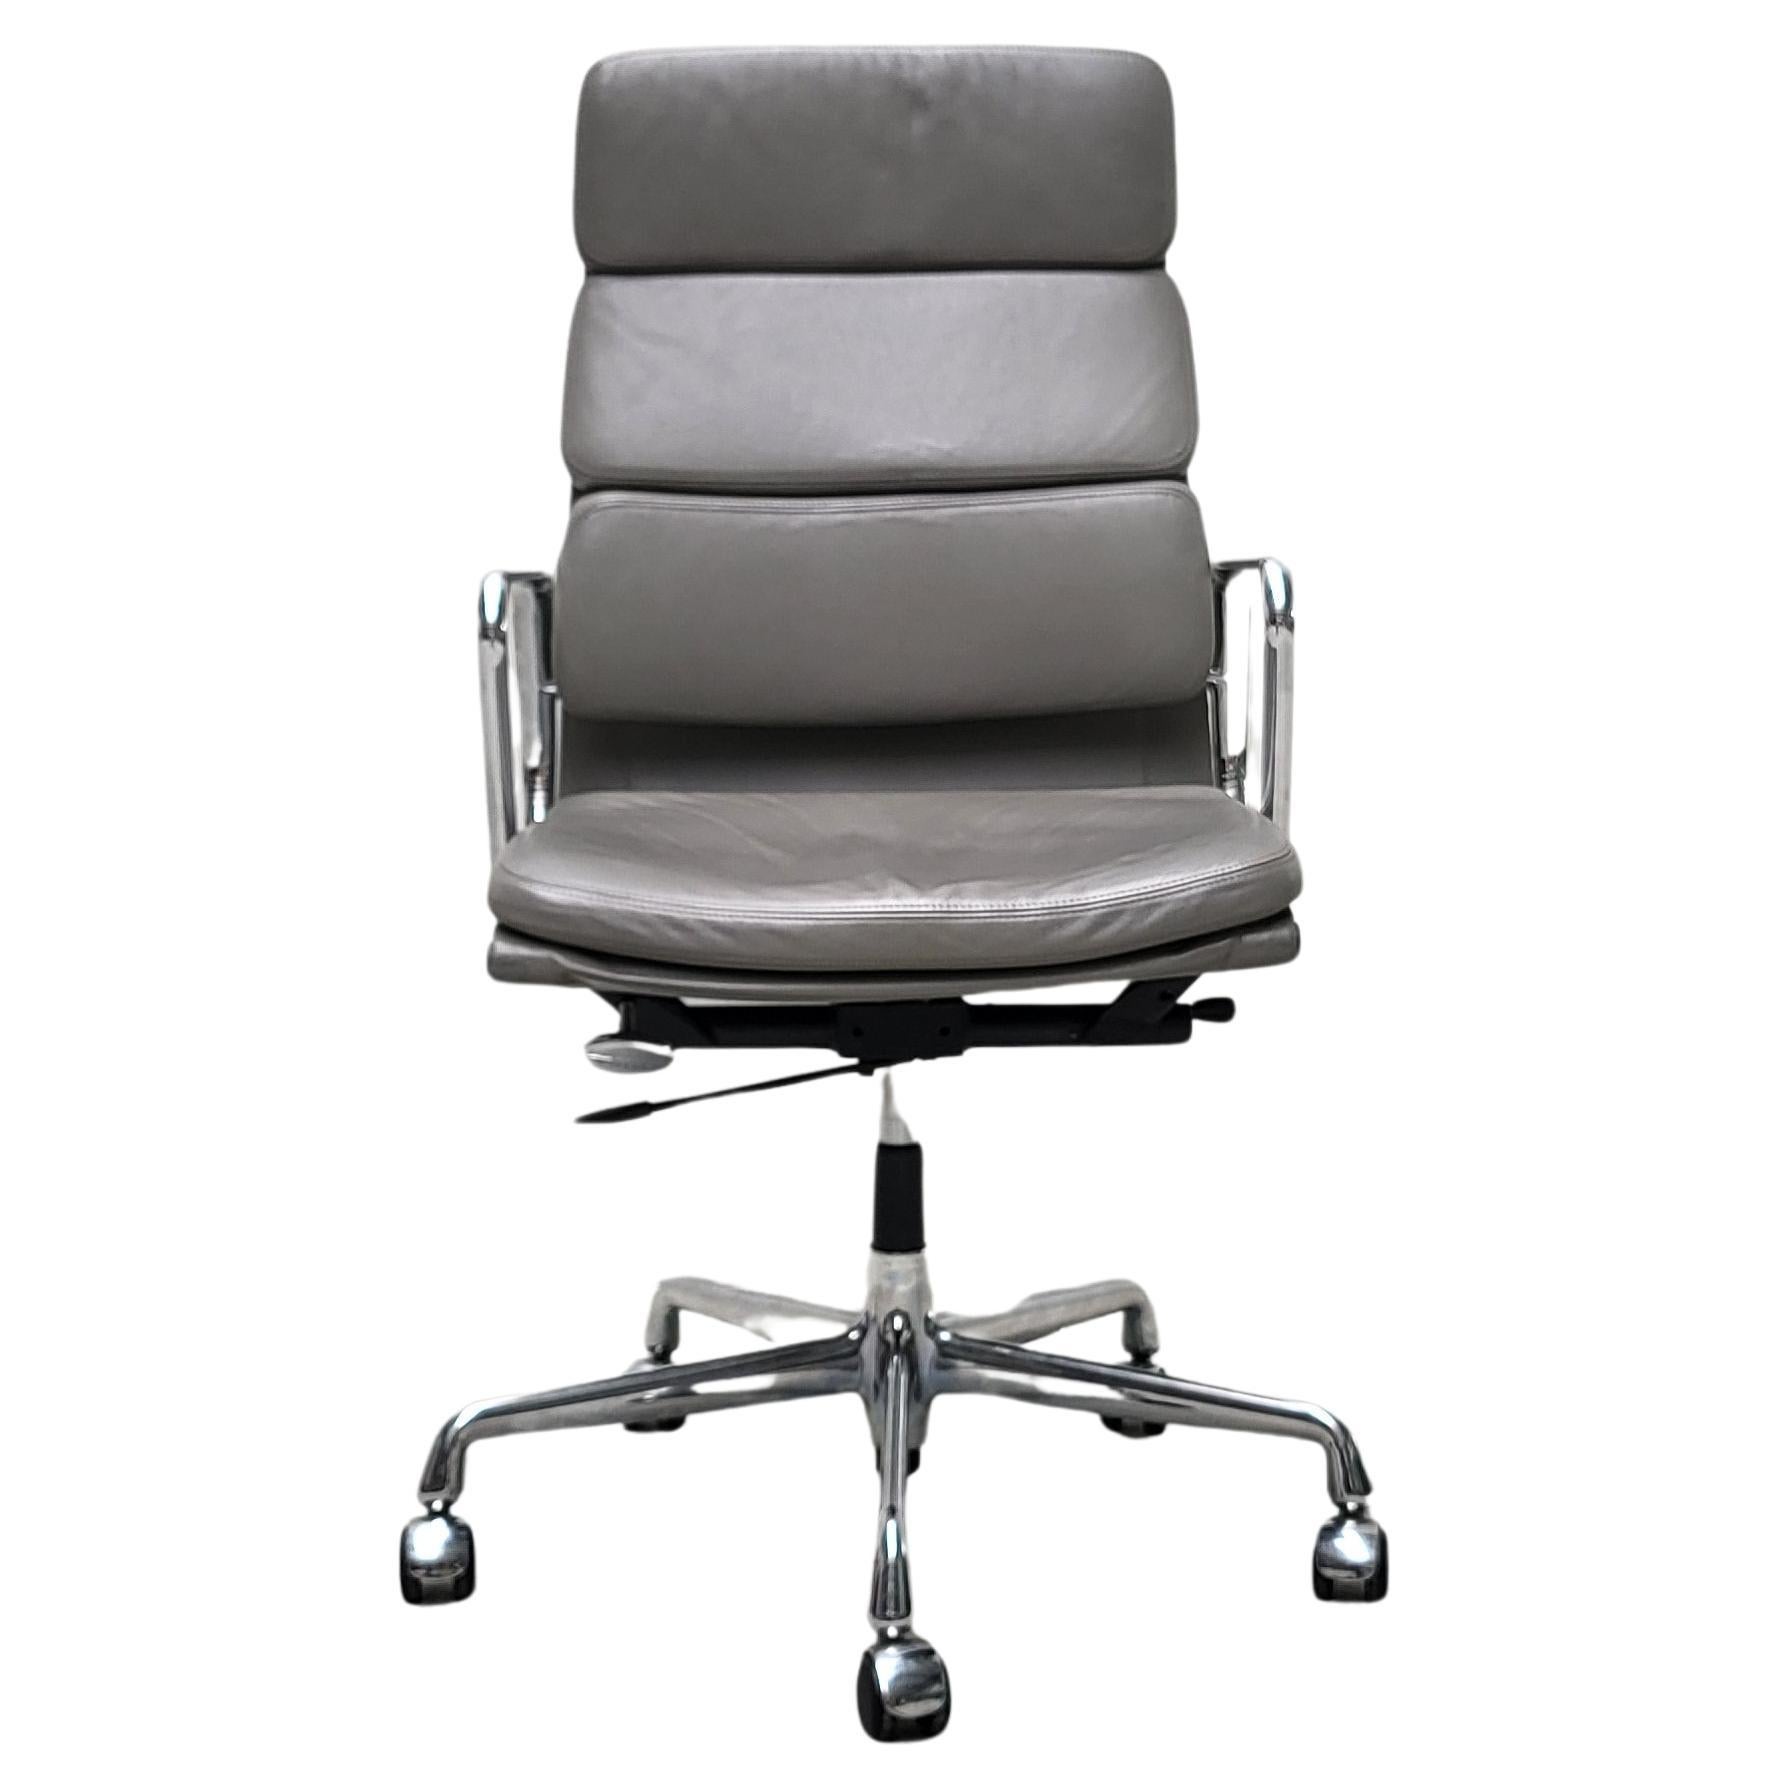 Grey Vitra EA219 Soft Pad Office Chair by Charles Eames, 2003 For Sale